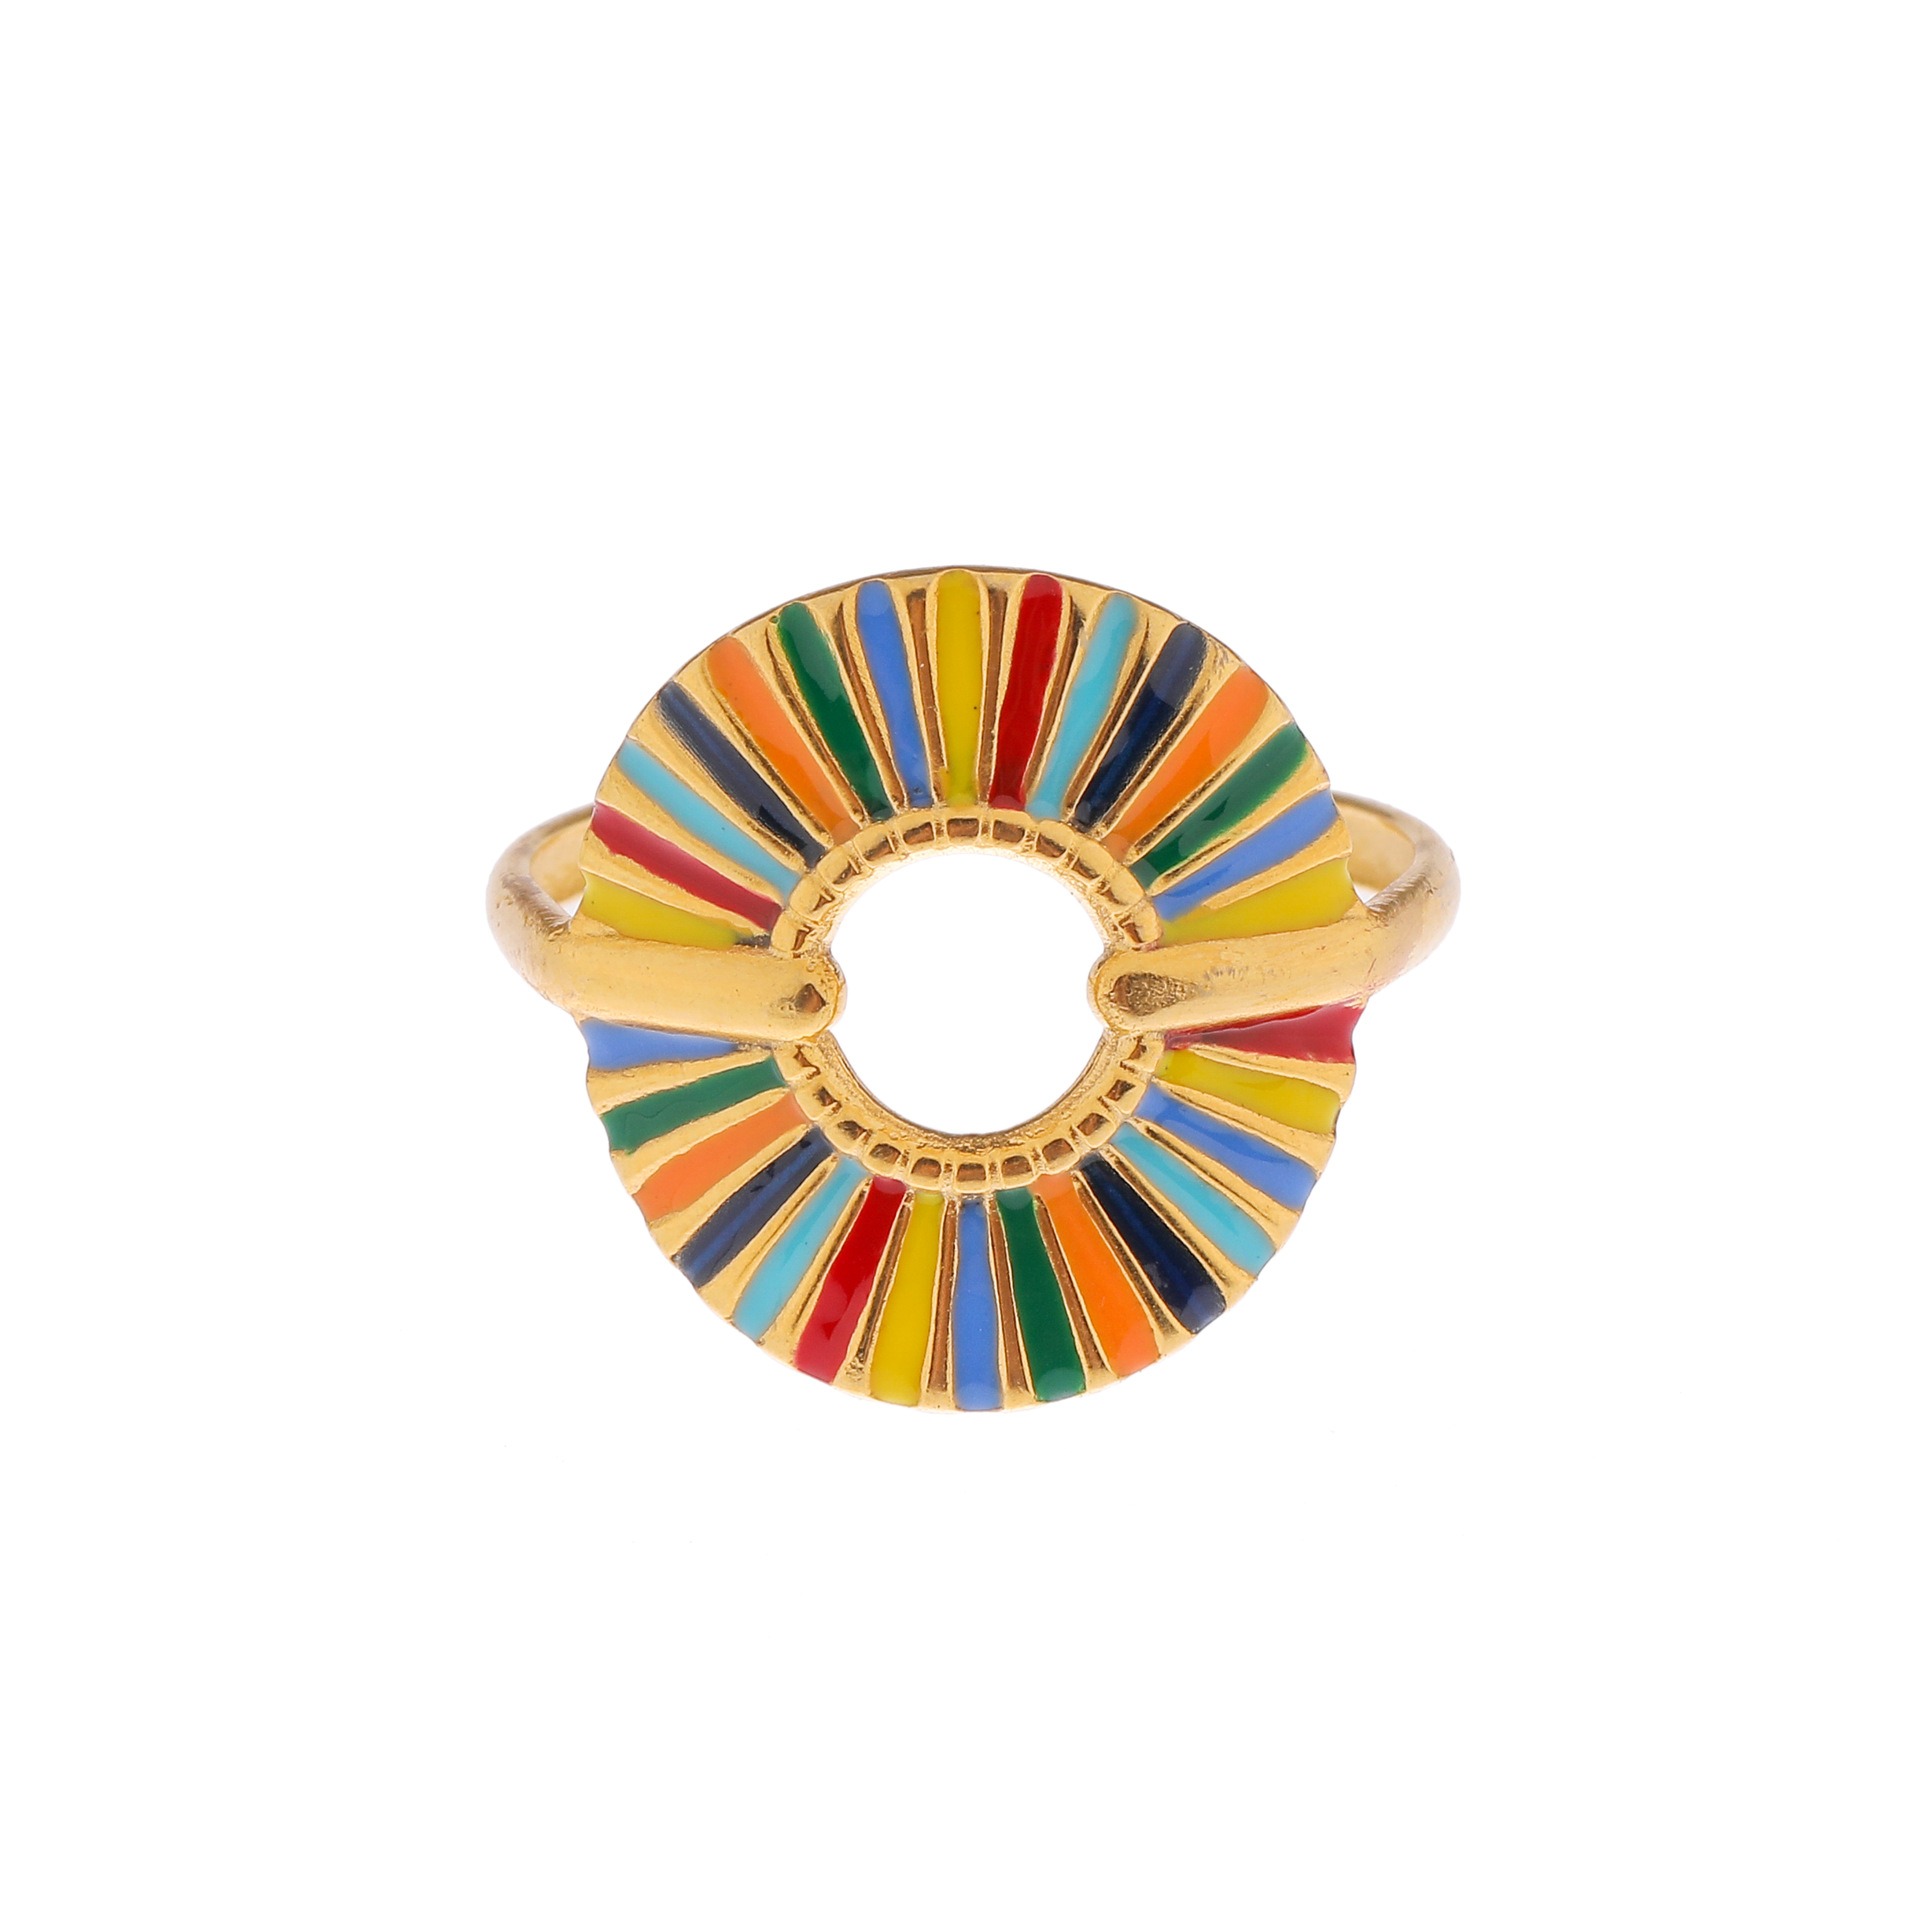 Retro niche rainbow opening creative ring, stainless steel golden opening circle, color oil drop ring